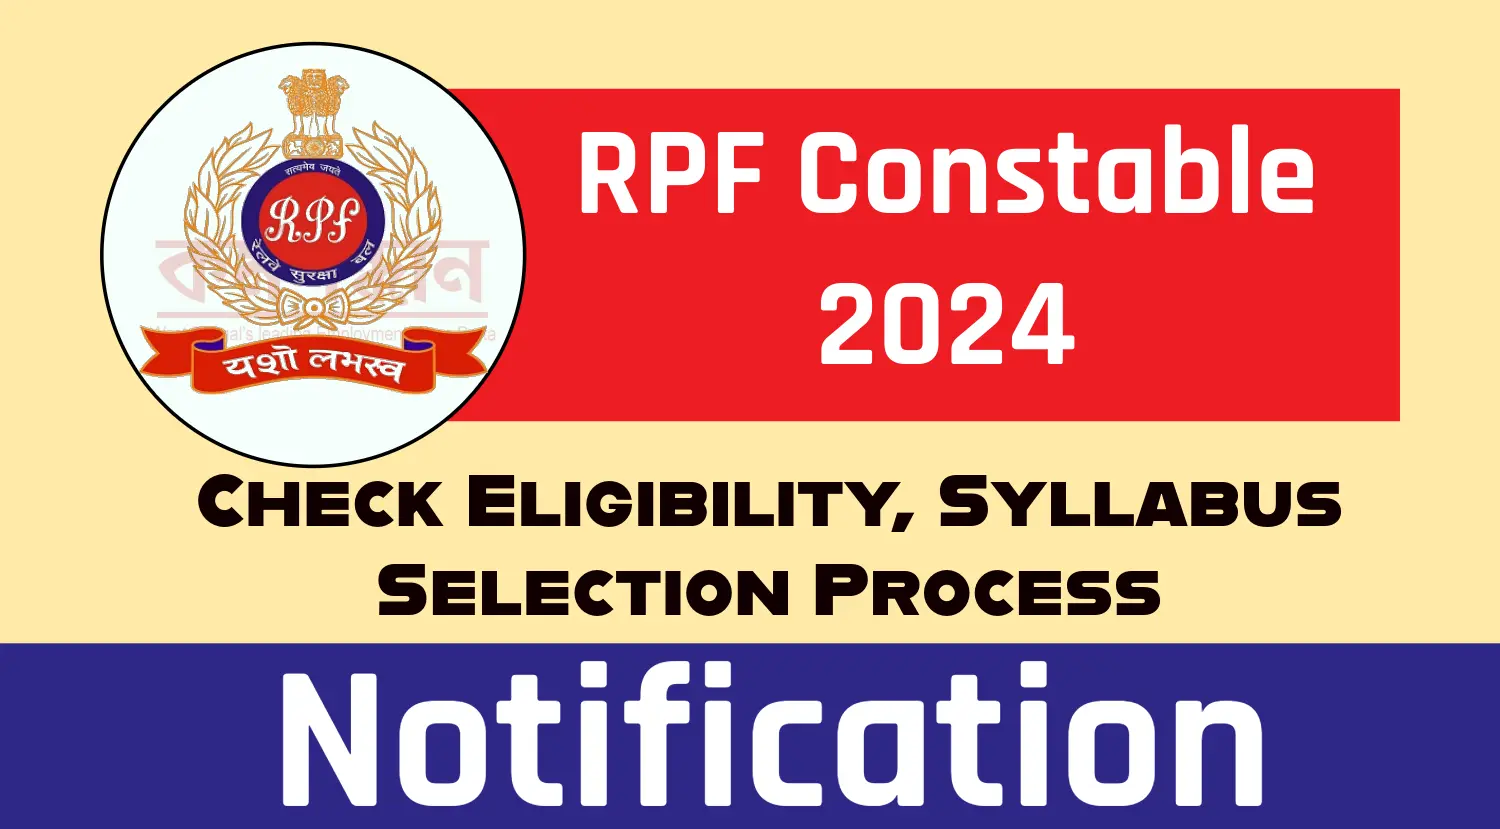 NFRLY. RPF/RPSF MUTUAL TRANSFER REQUEST | Facebook